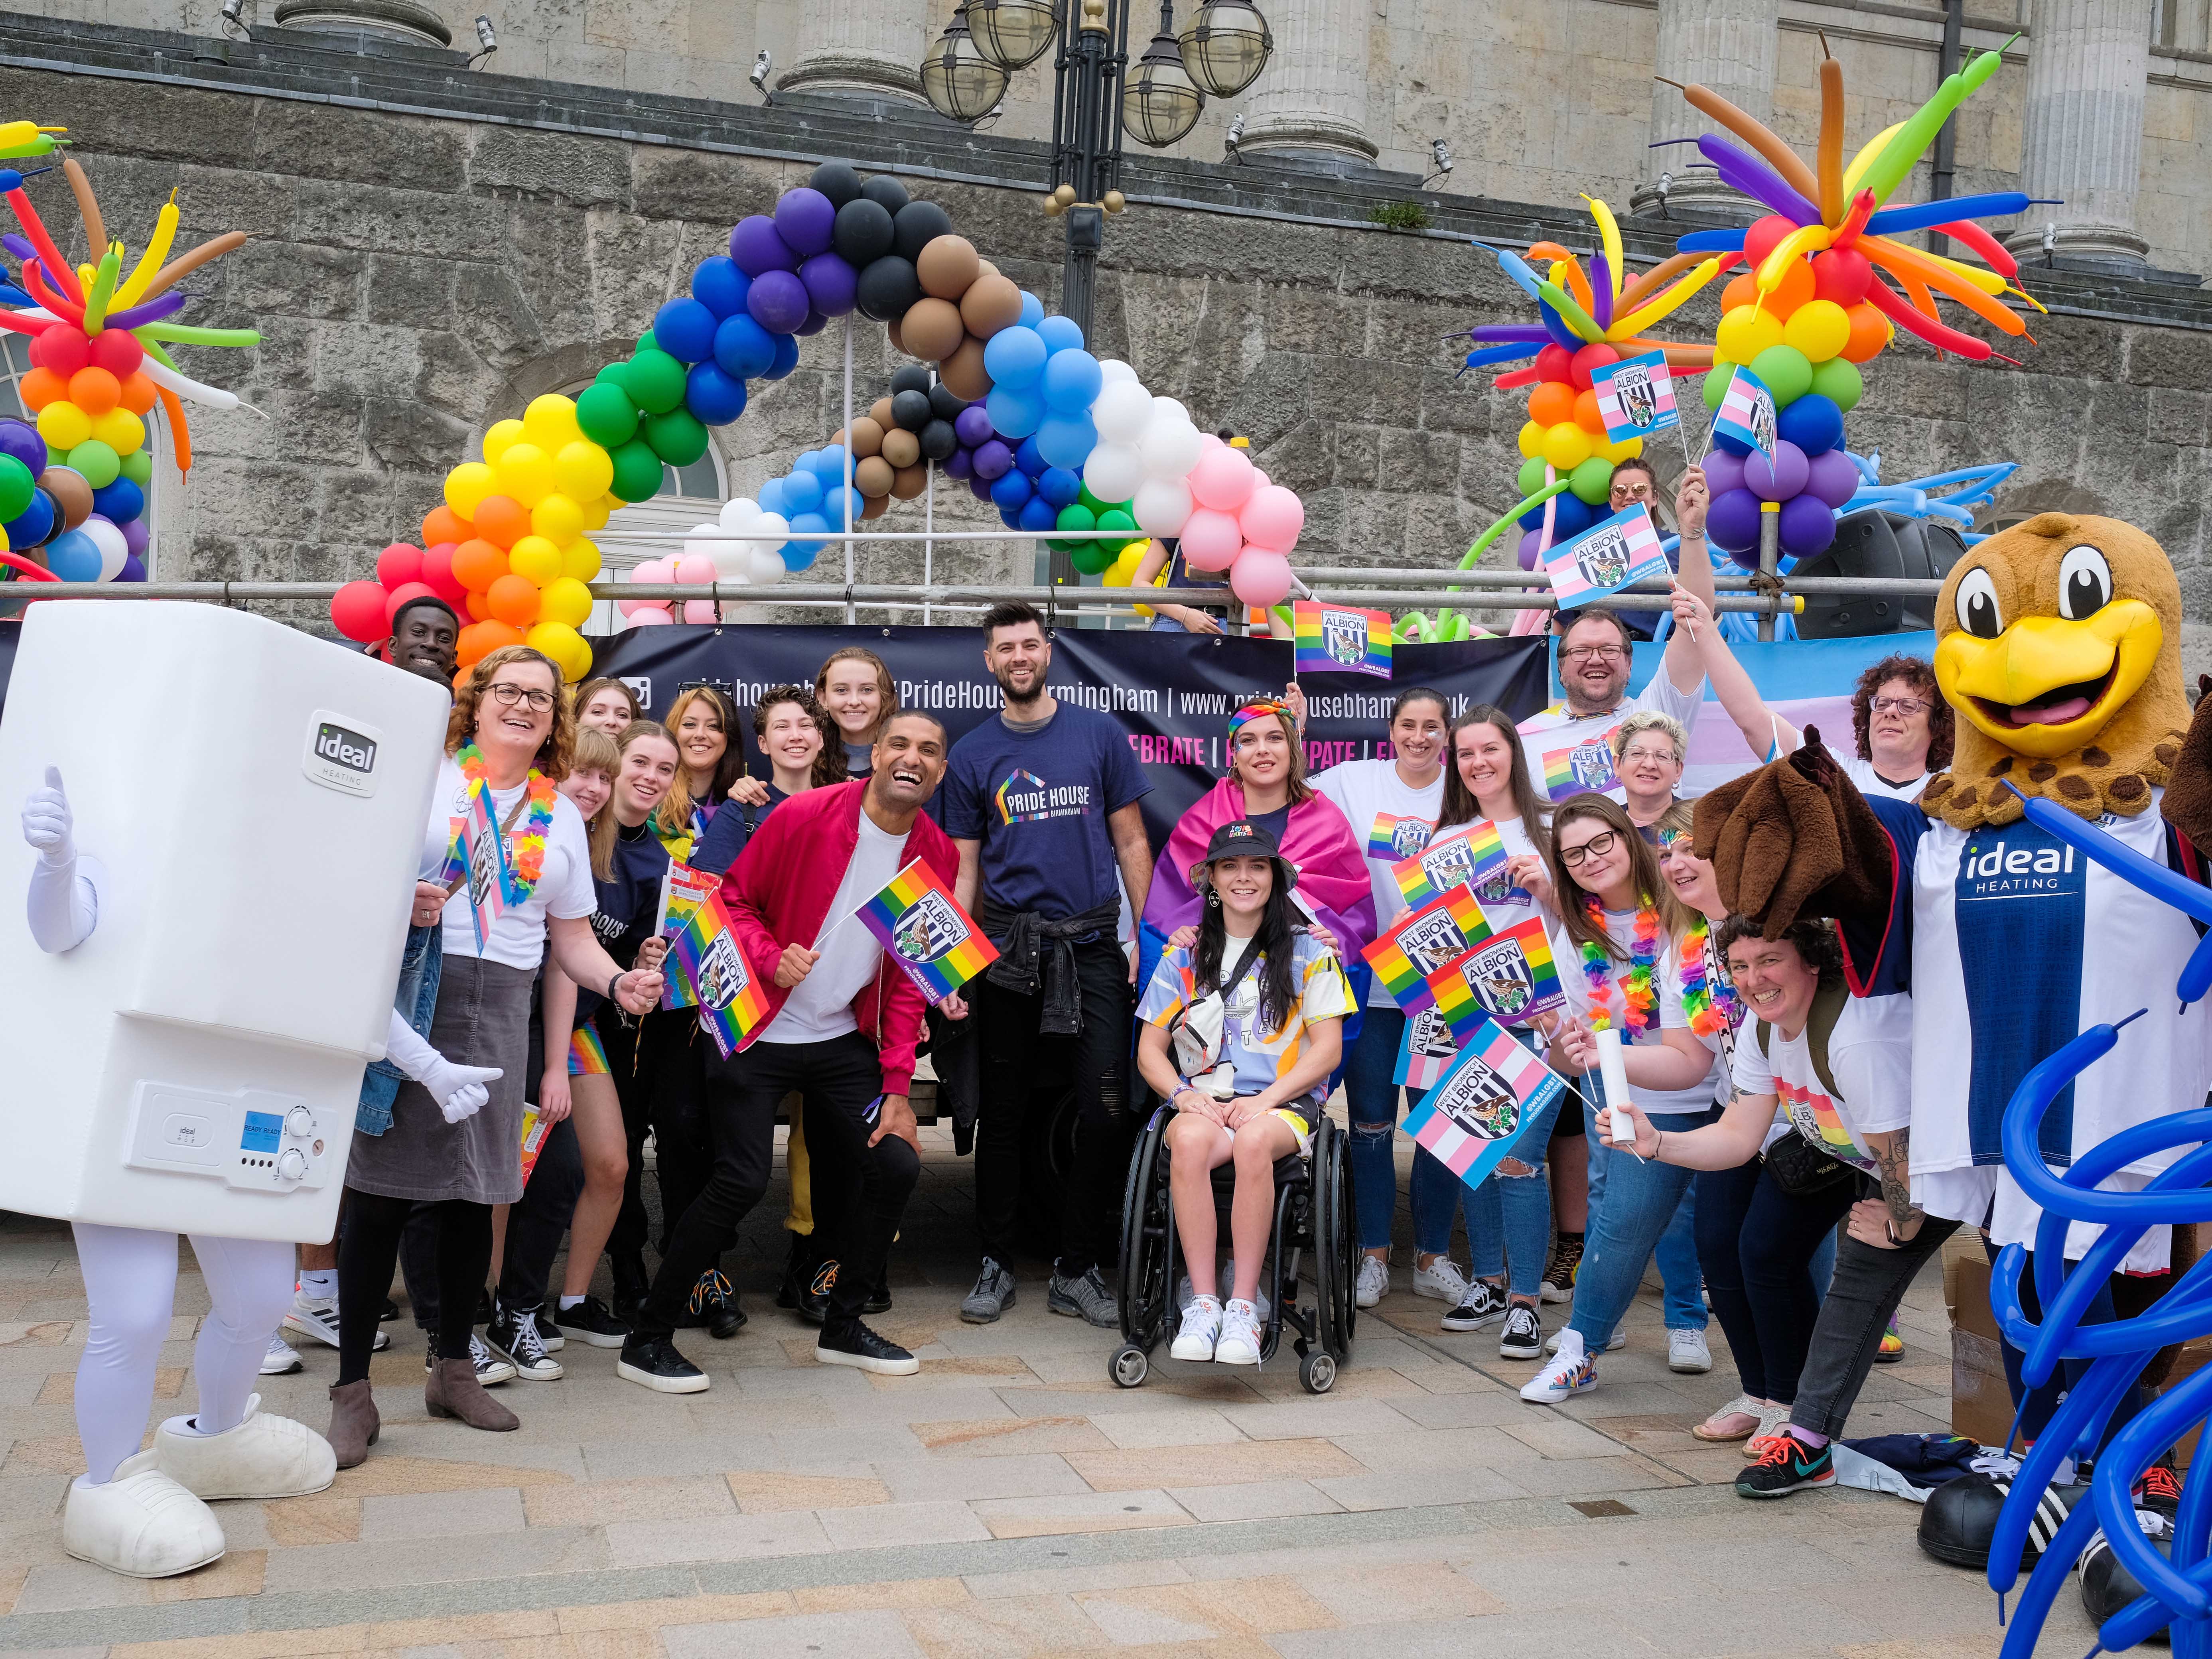 Albion supporters’ group Proud Baggies joined the celebrations alongside thousands of people at Birmingham Pride over the weekend